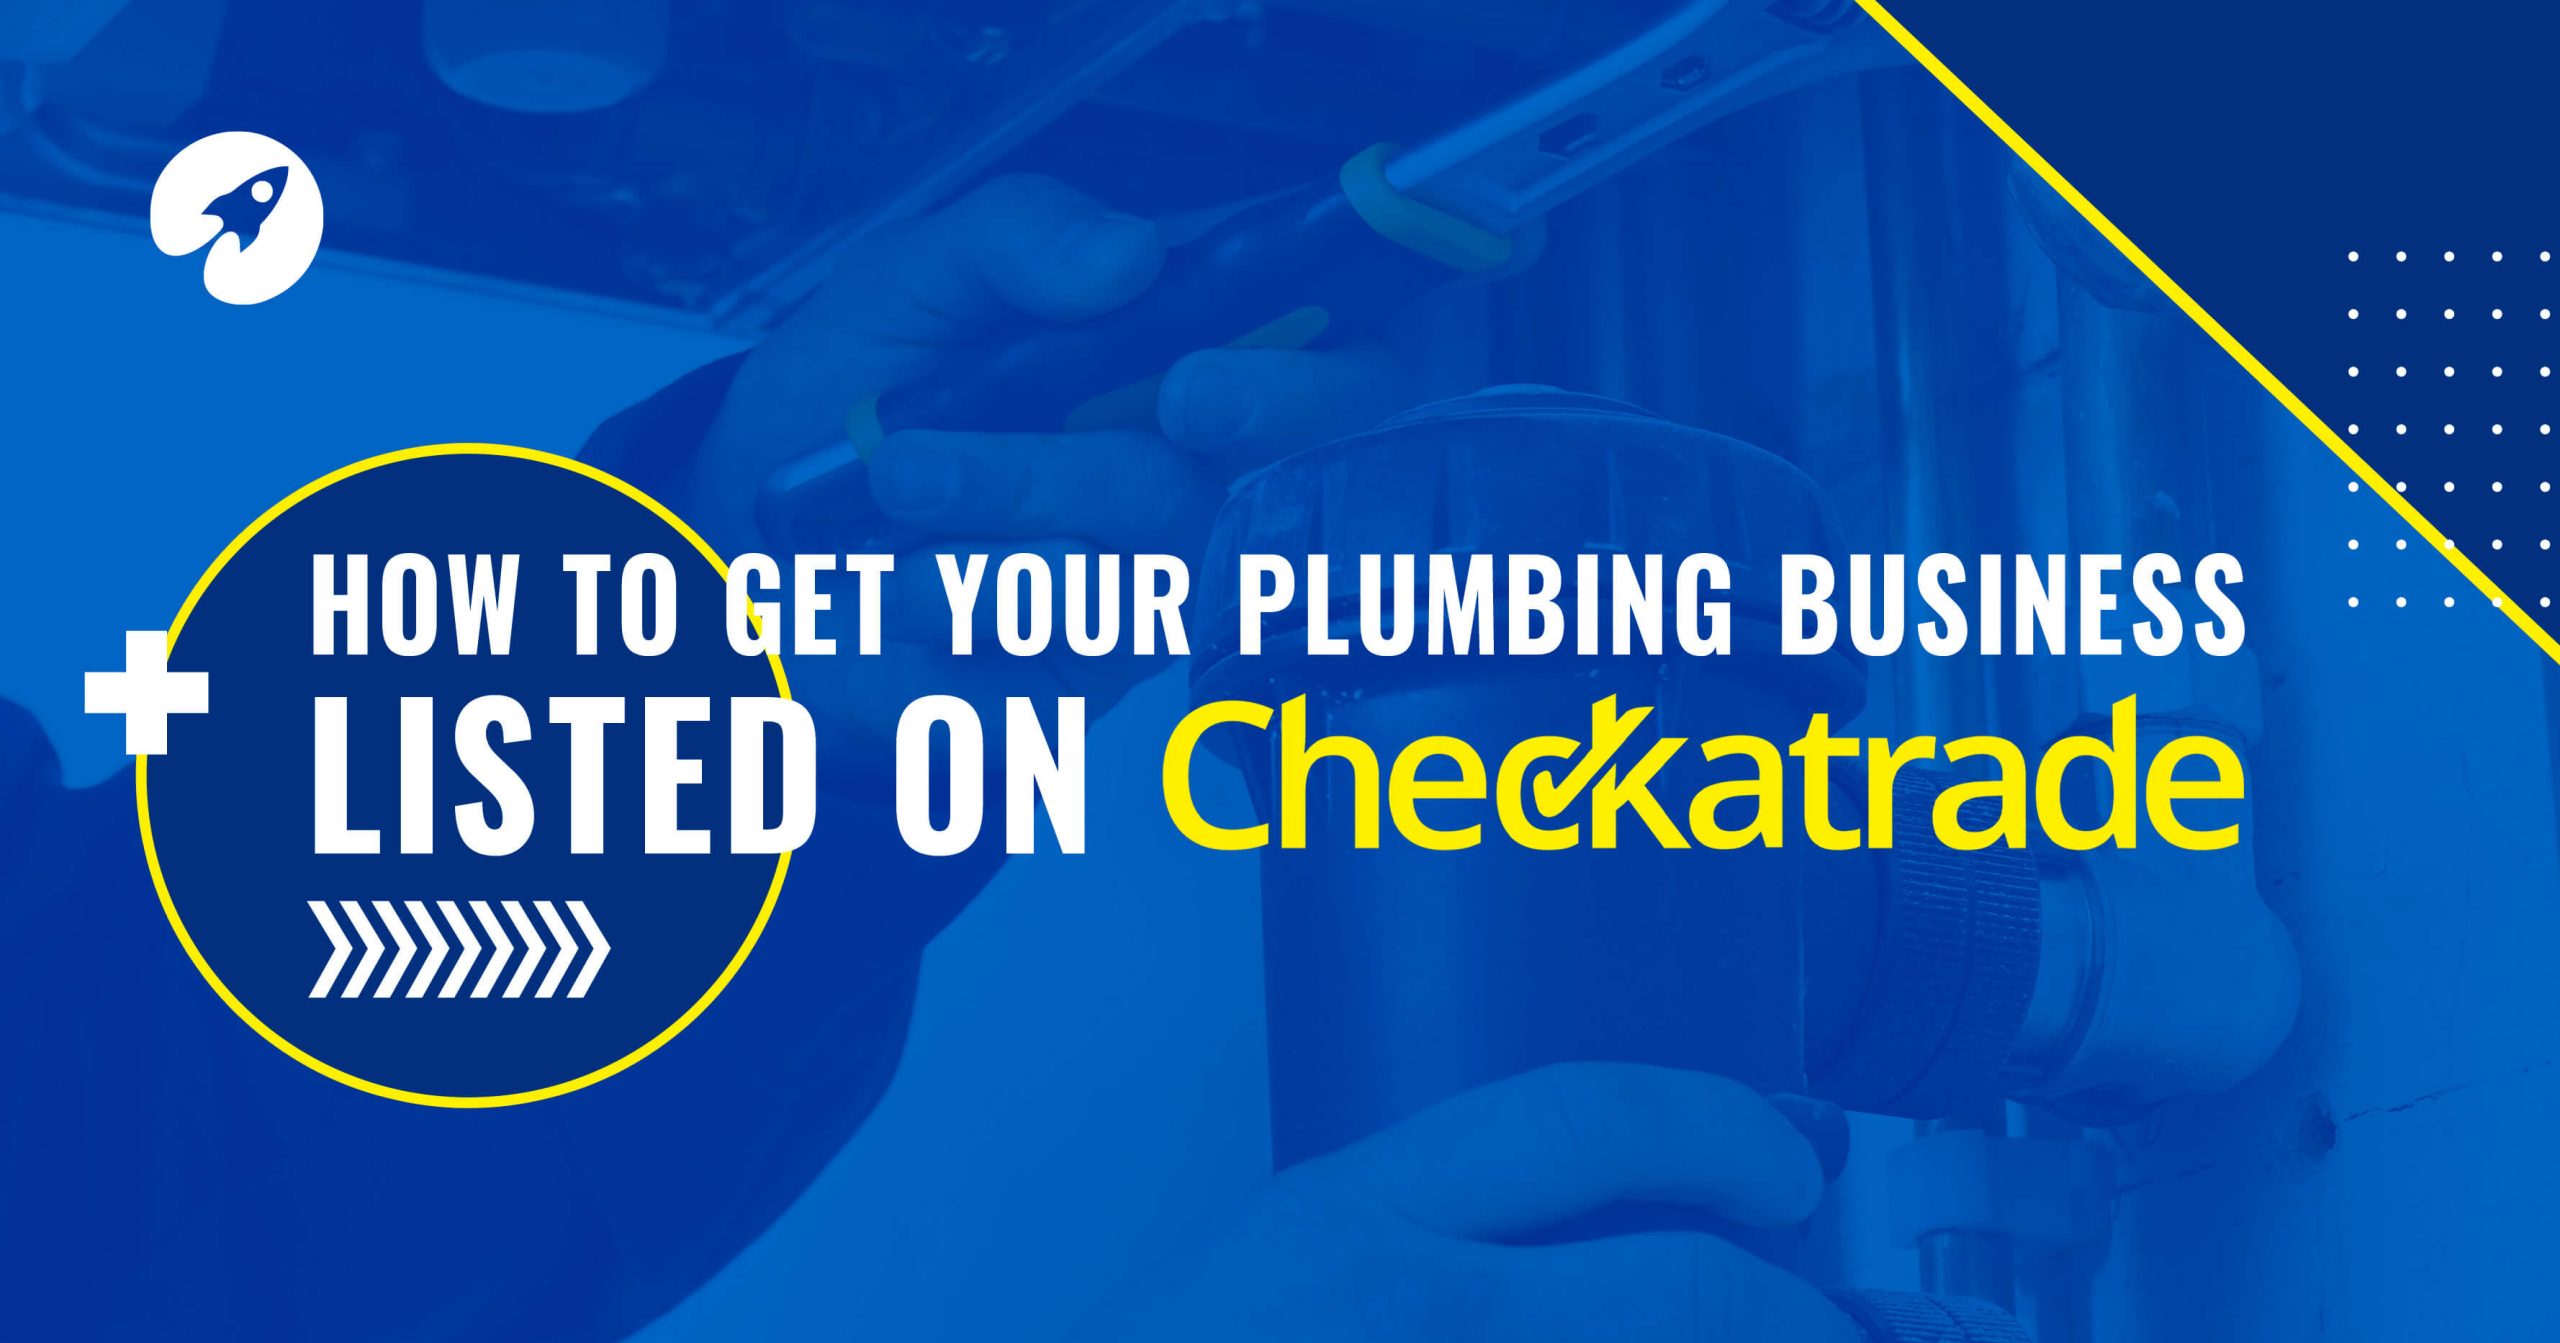 How to get your plumbing business listed on Checkatrade